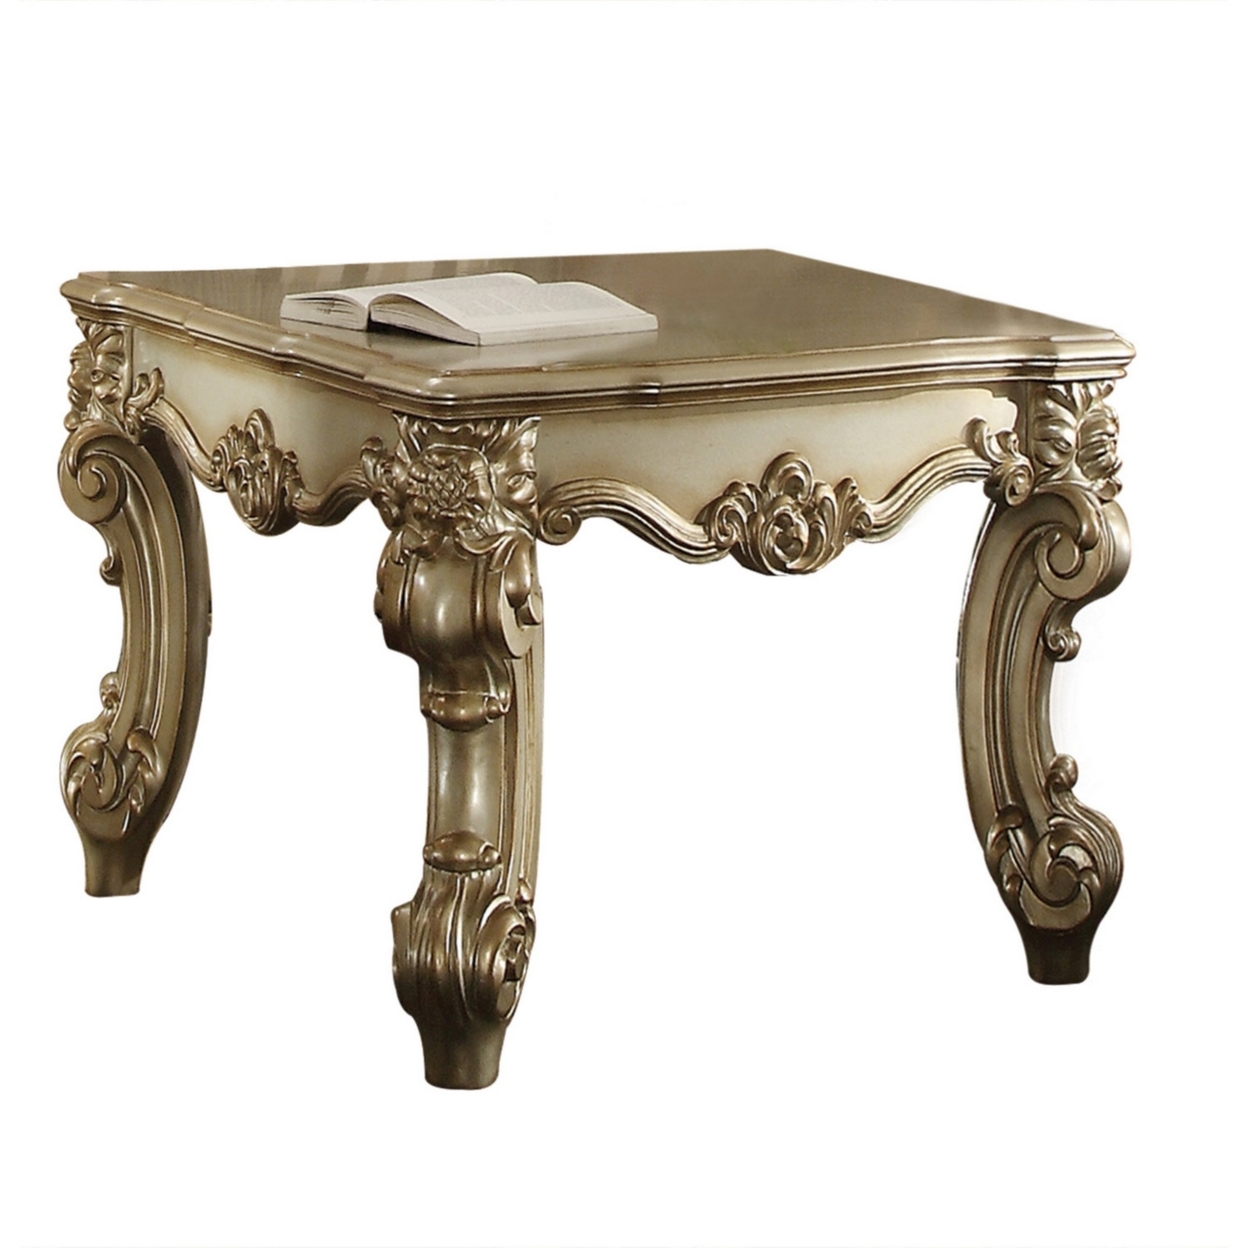 26 Inch Side End Table, Orante Carvings With Scrolled Legs, Classic Gold